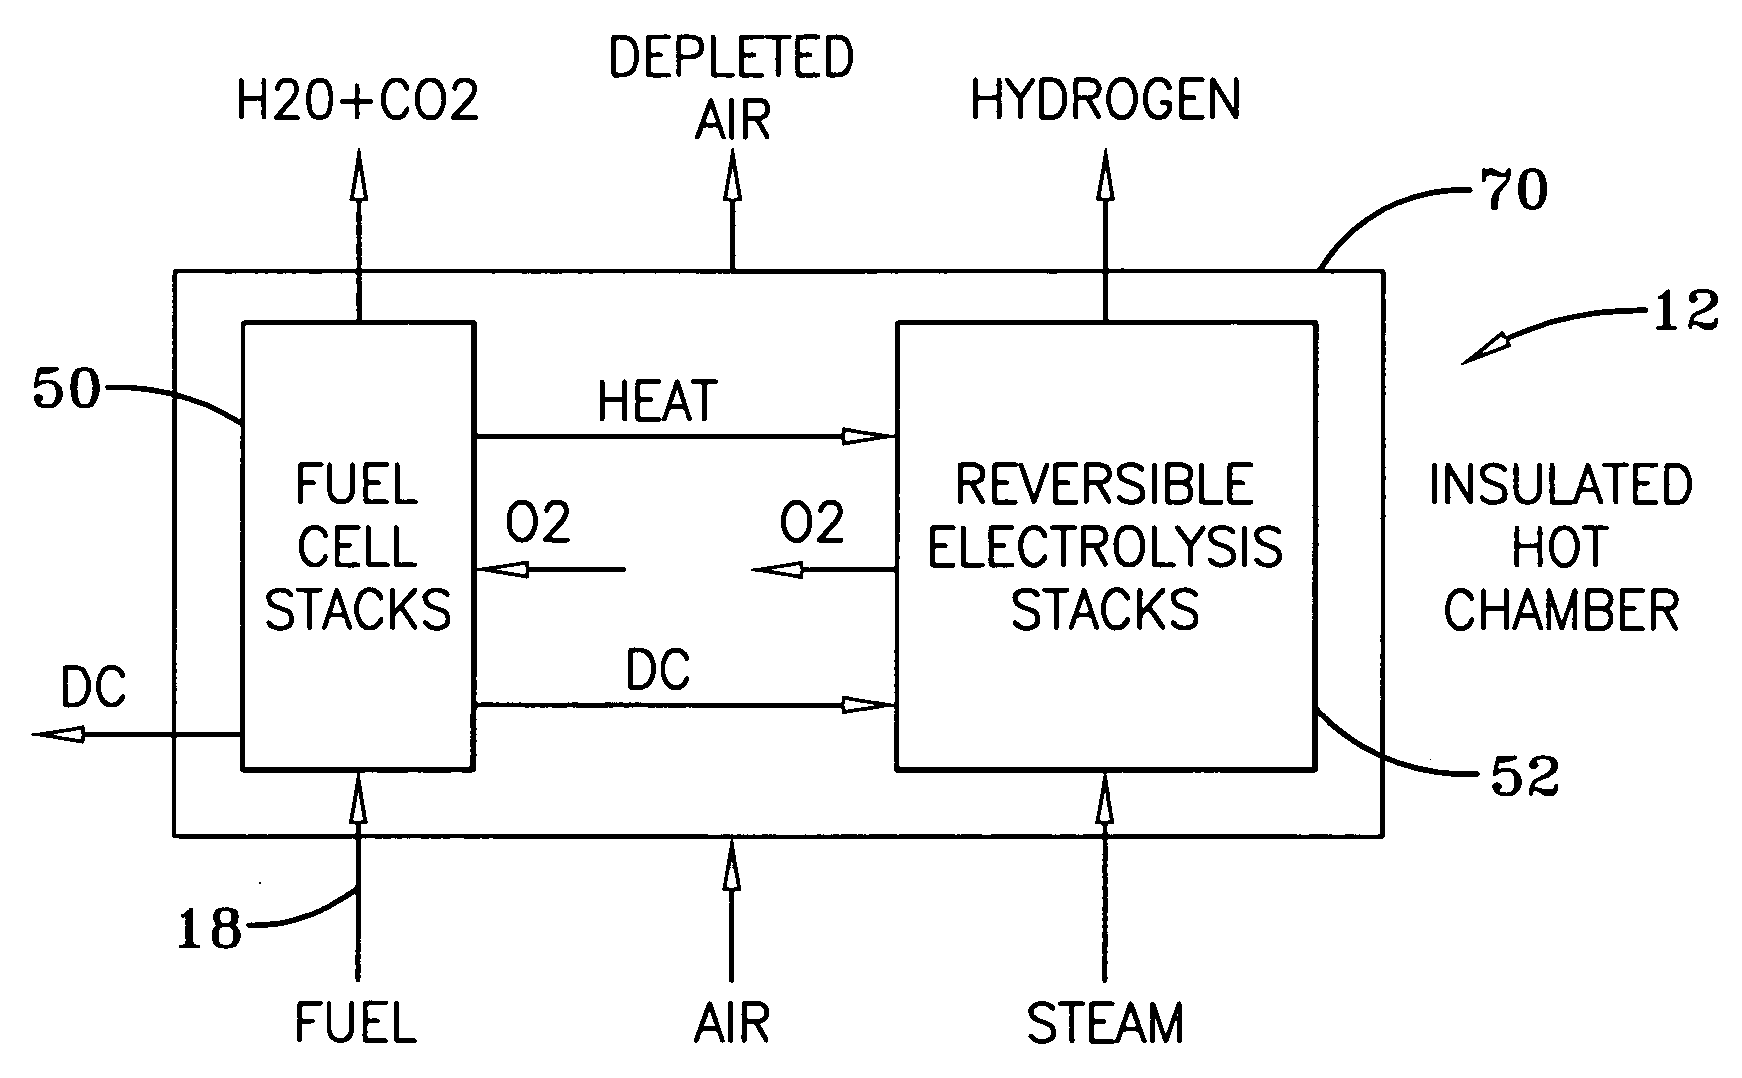 High efficiency system for low cost conversion of fuel to vehicle hydrogen